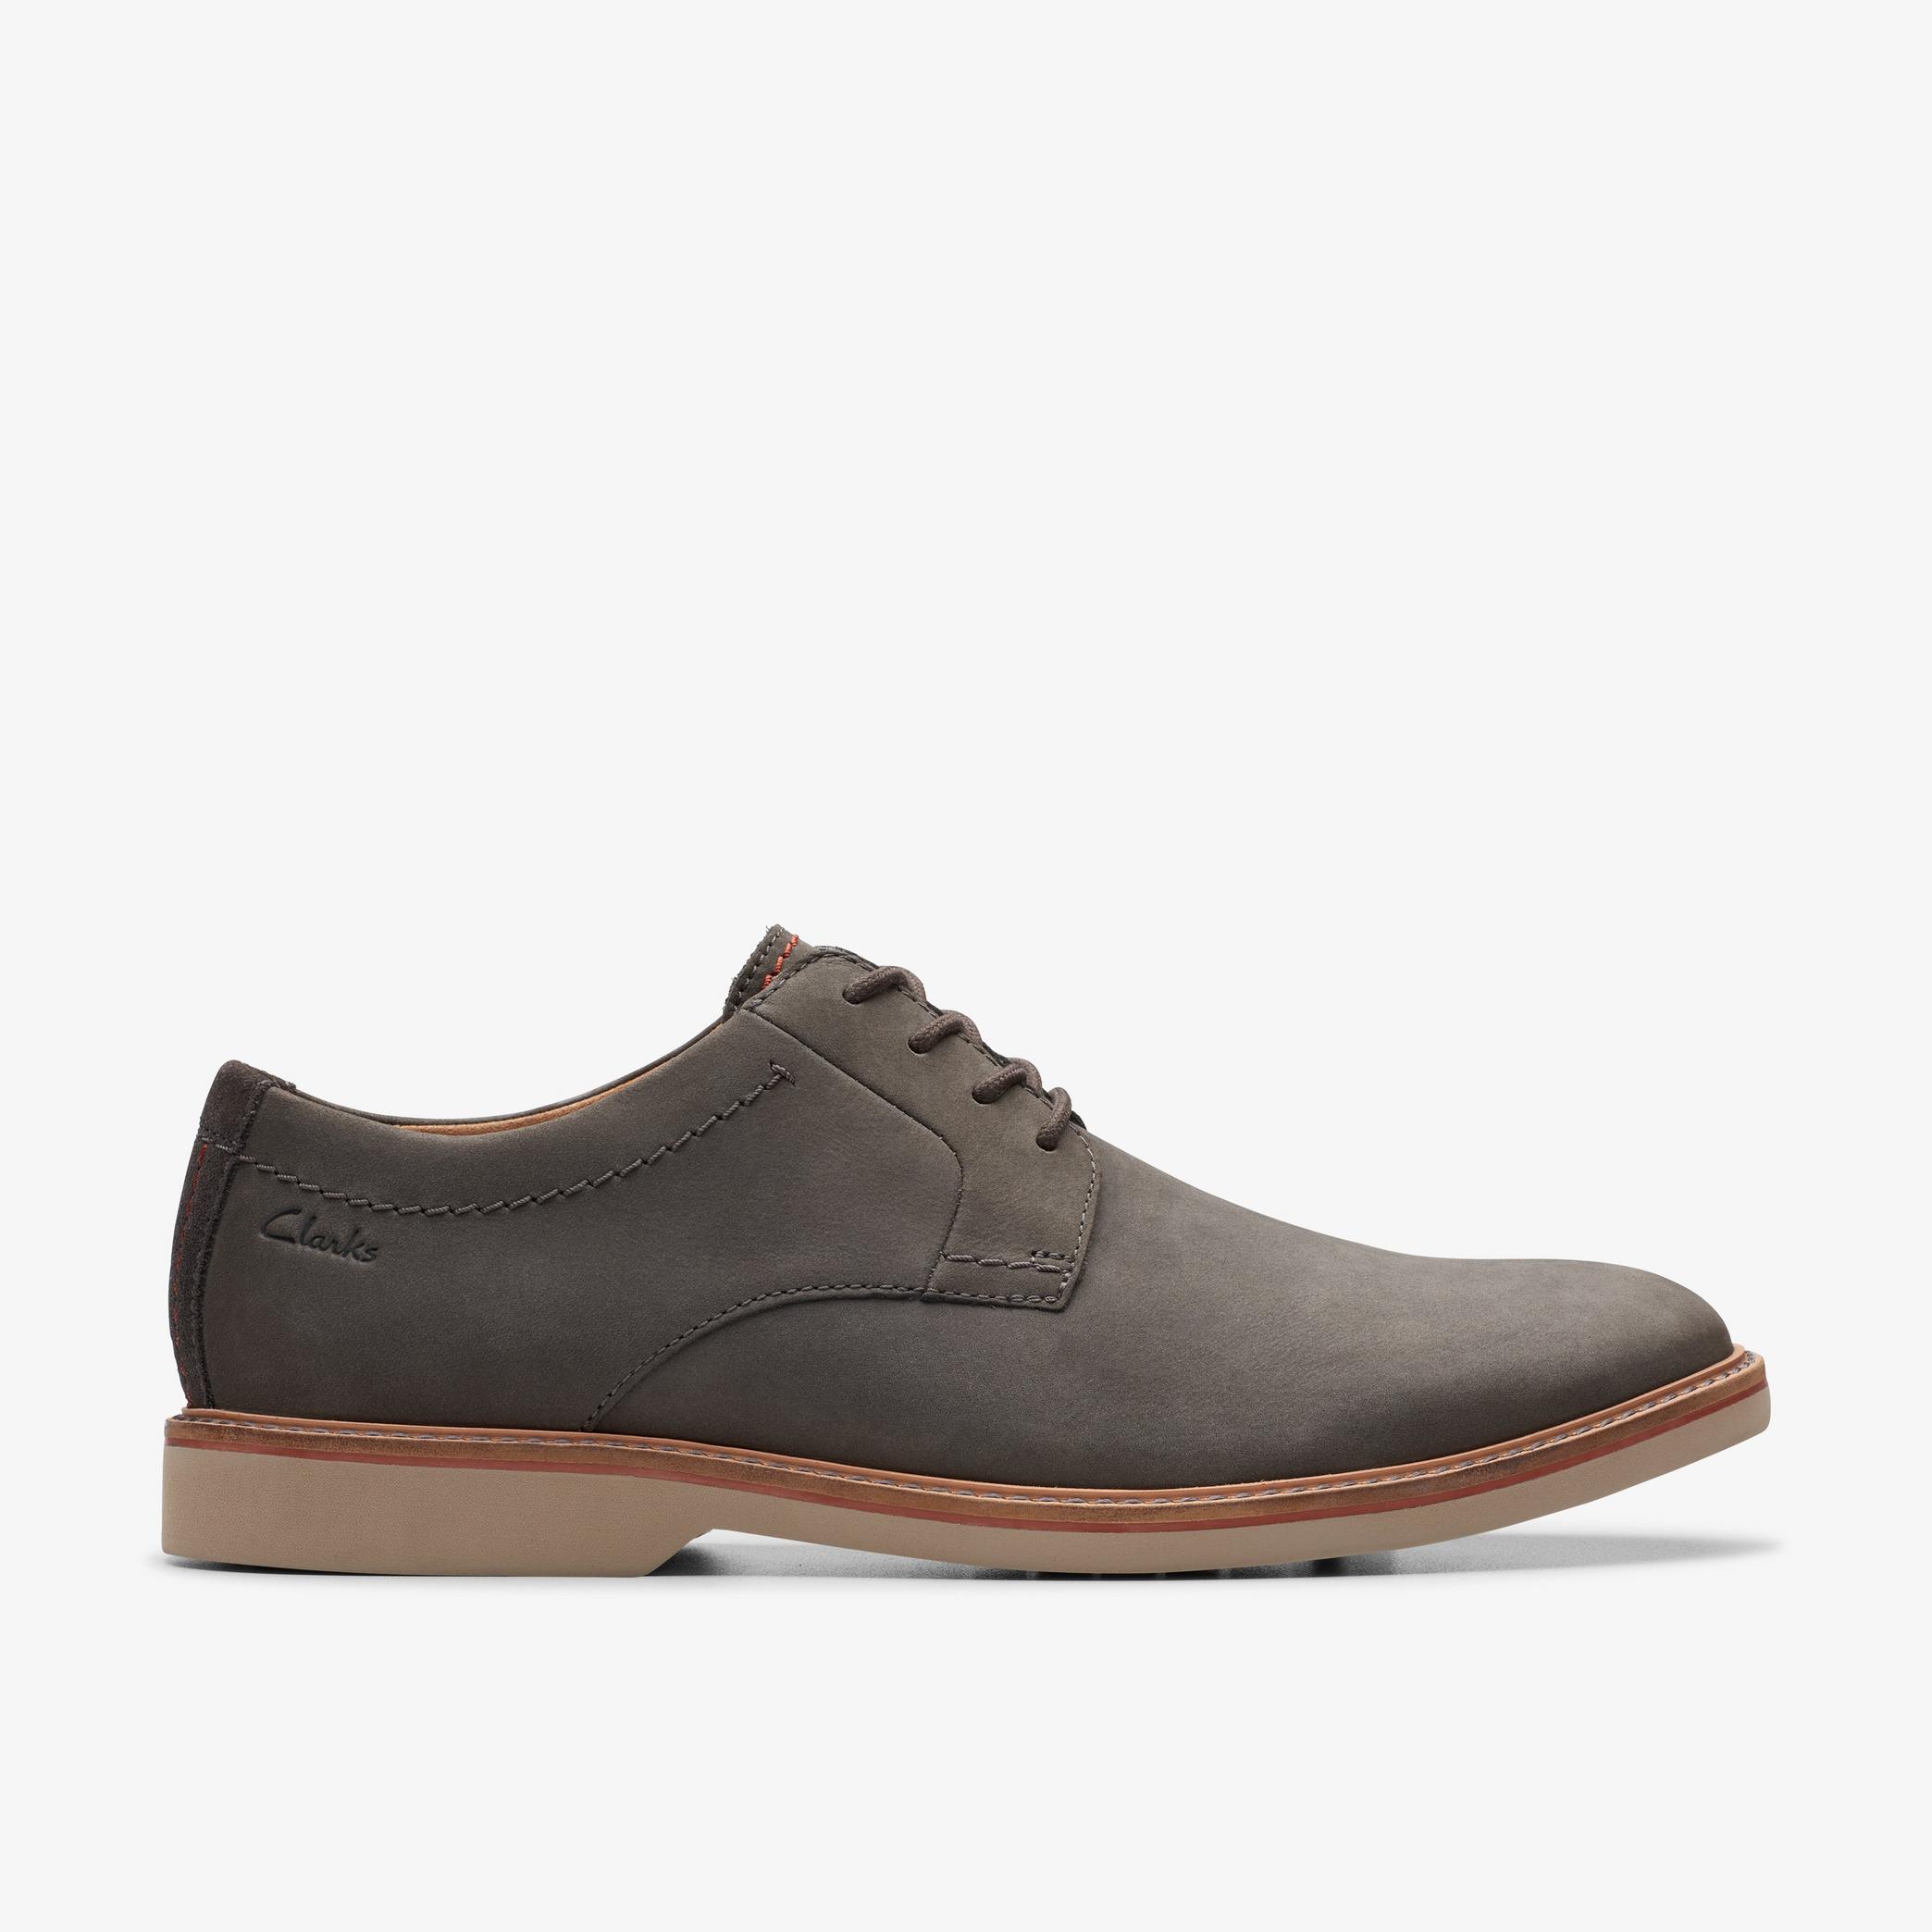 Atticus LT Lace Dark Grey Nubuck Oxford Shoes, view 1 of 6